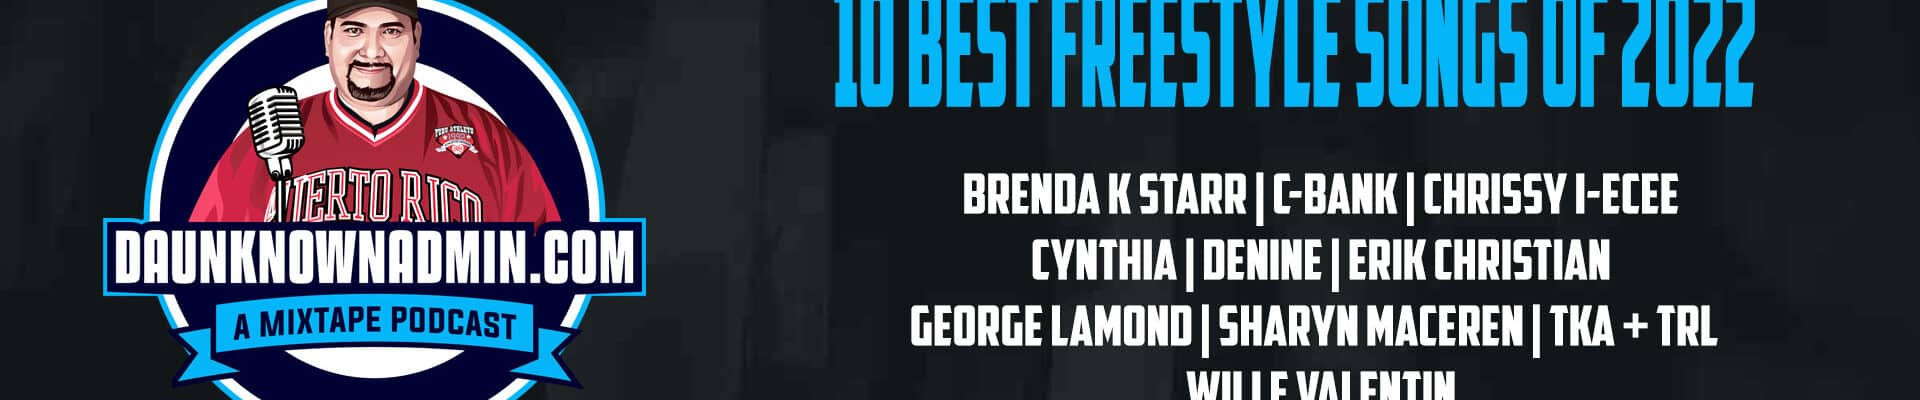 10 Best Freestyle Songs of 2022